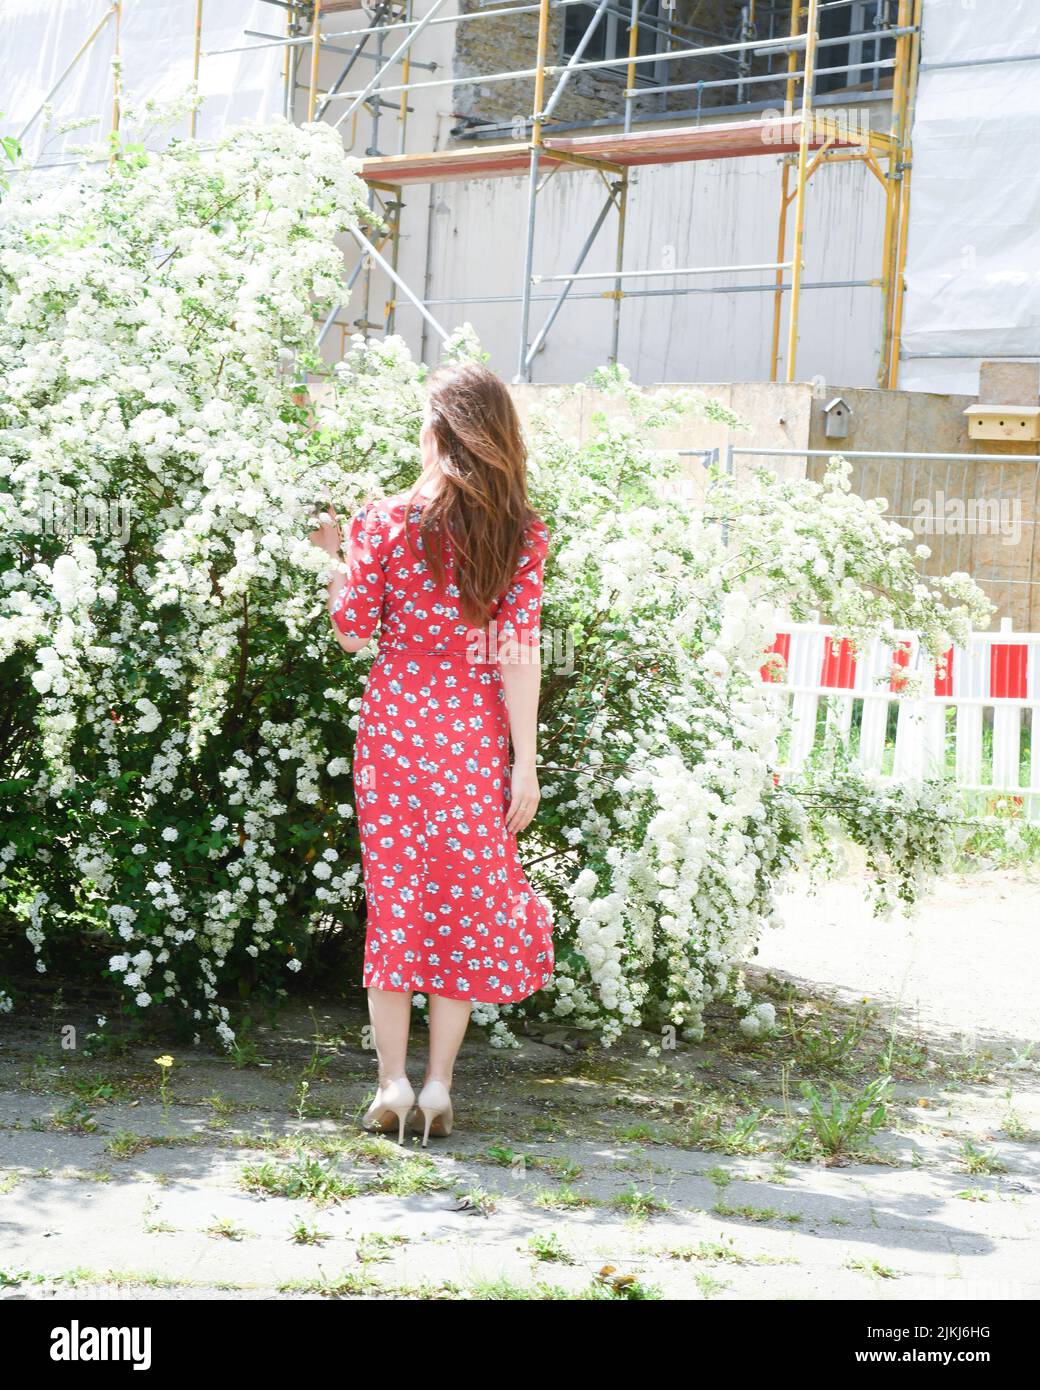 woman, back view, red dress, unrecognizable, flowers, bushes Stock Photo